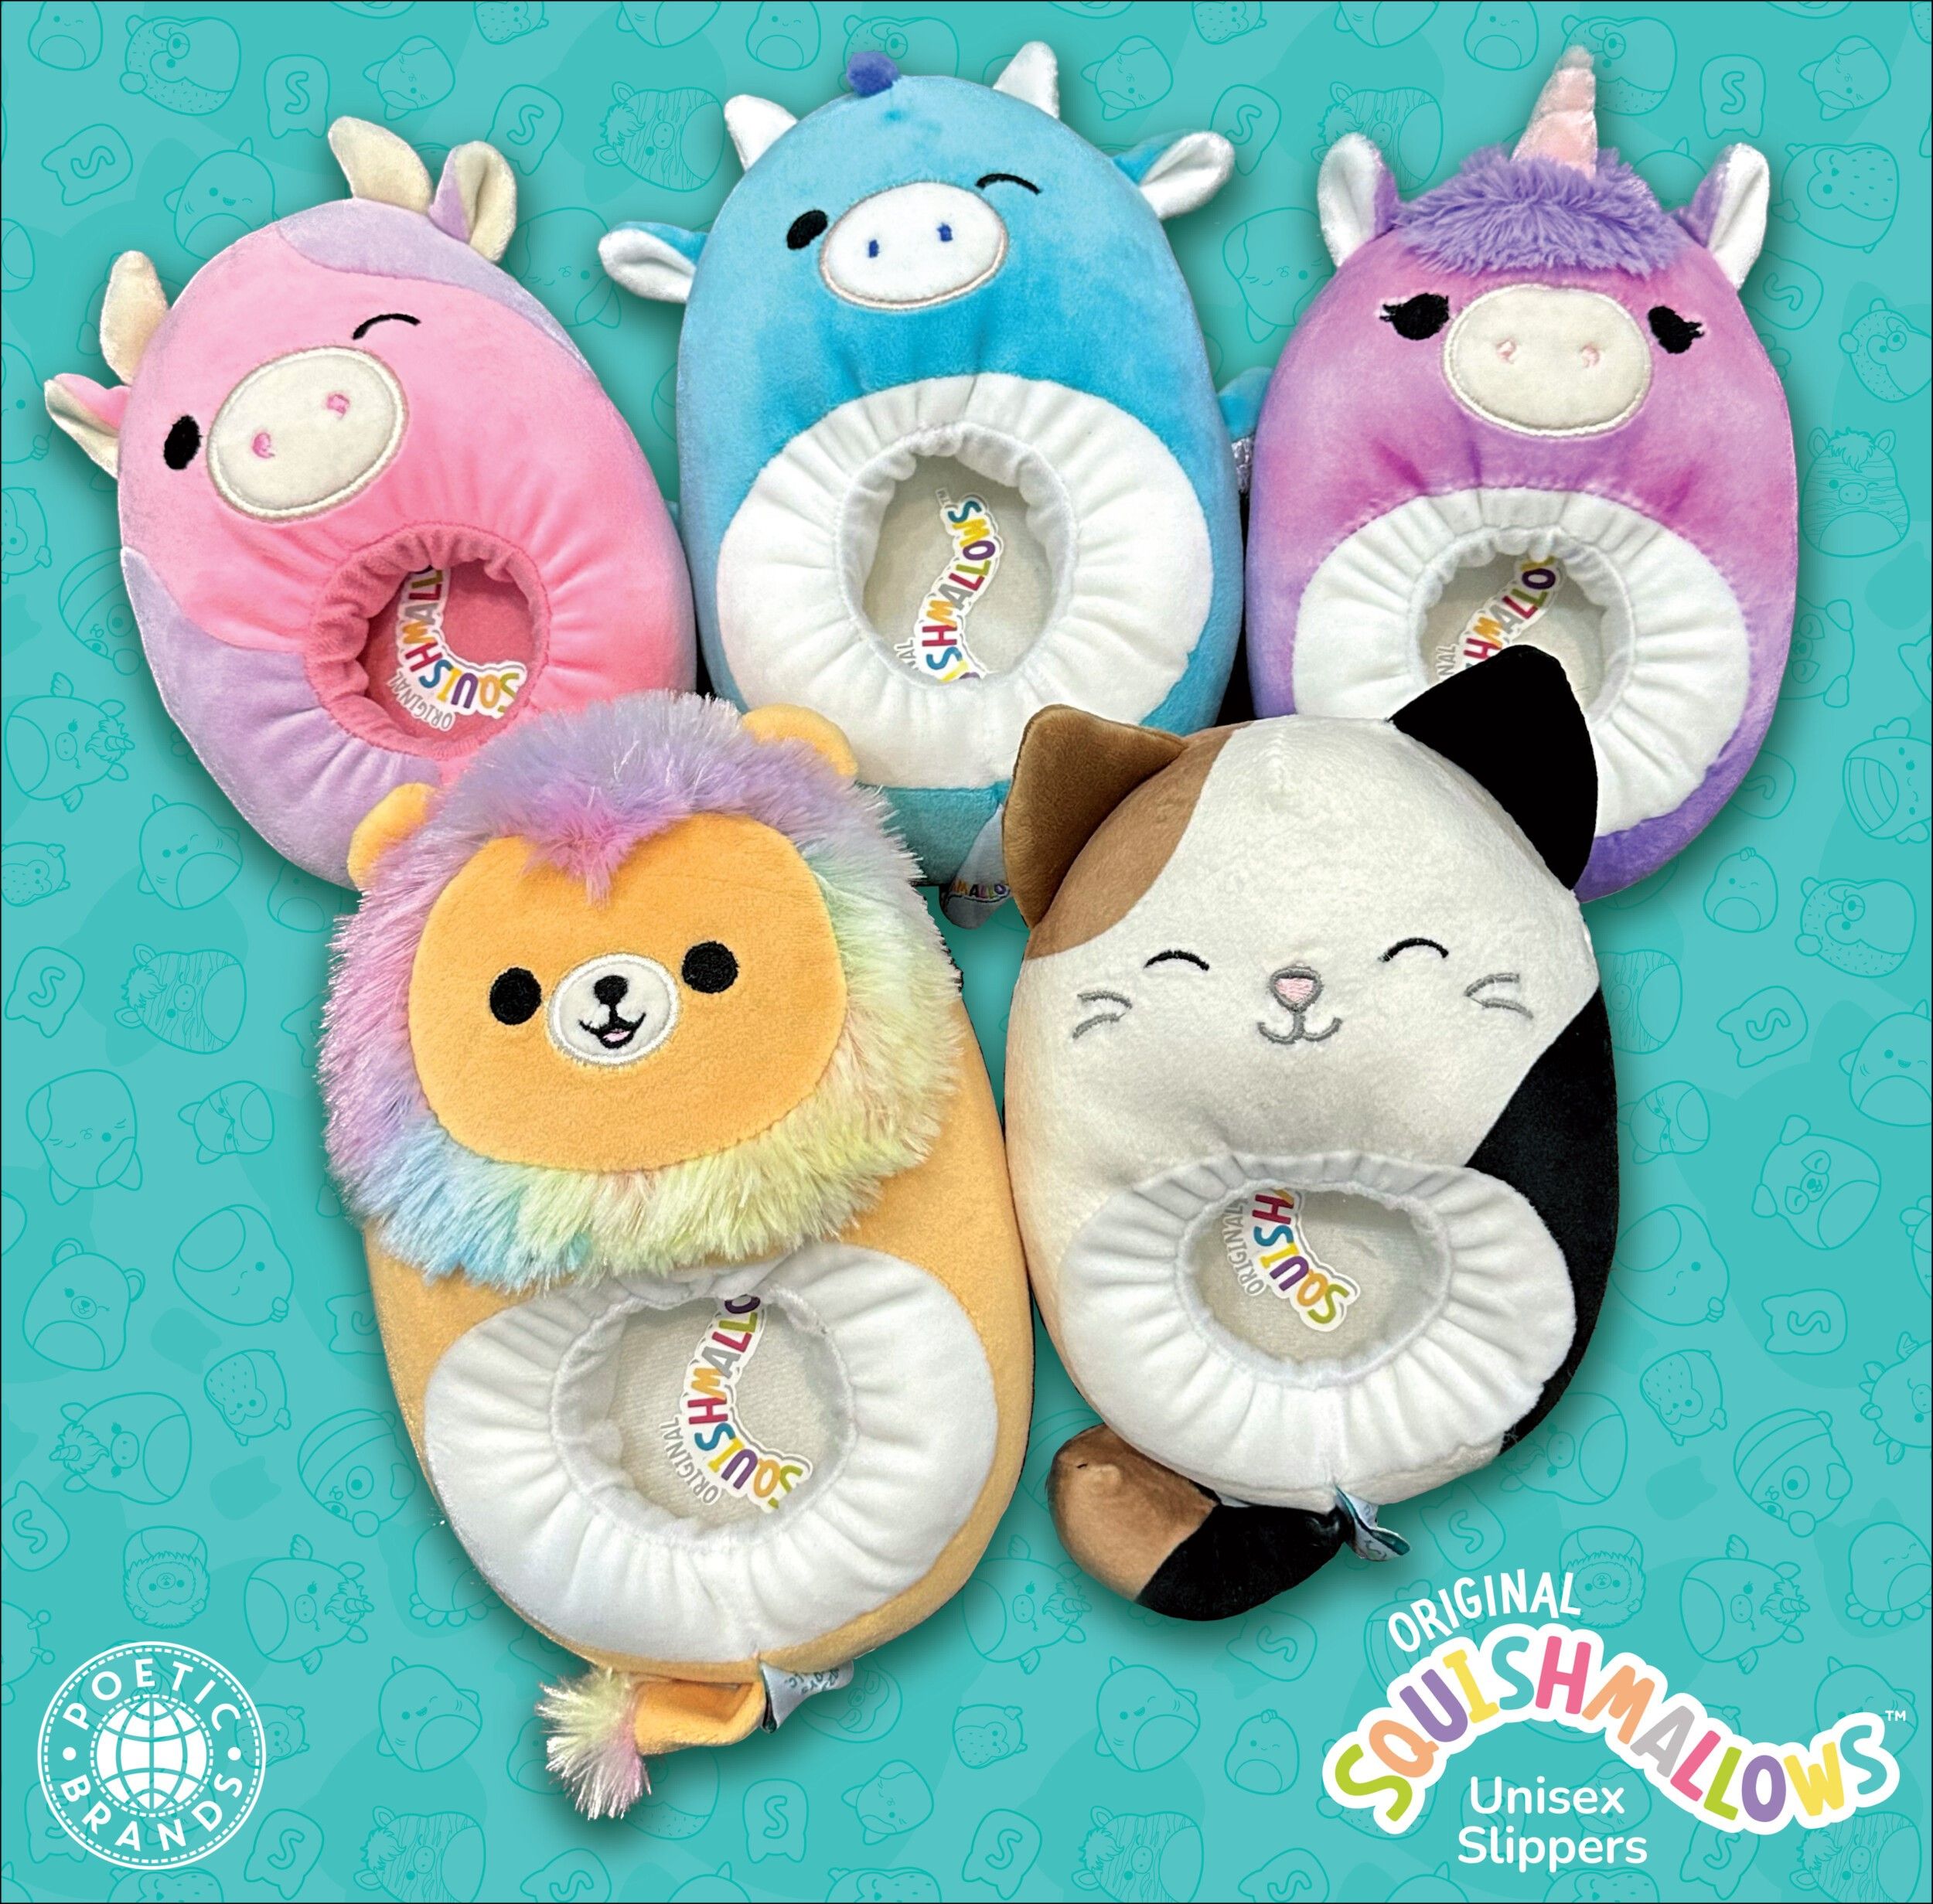 Poetic Brands secures exclusive European footwear rights for Squishmallows